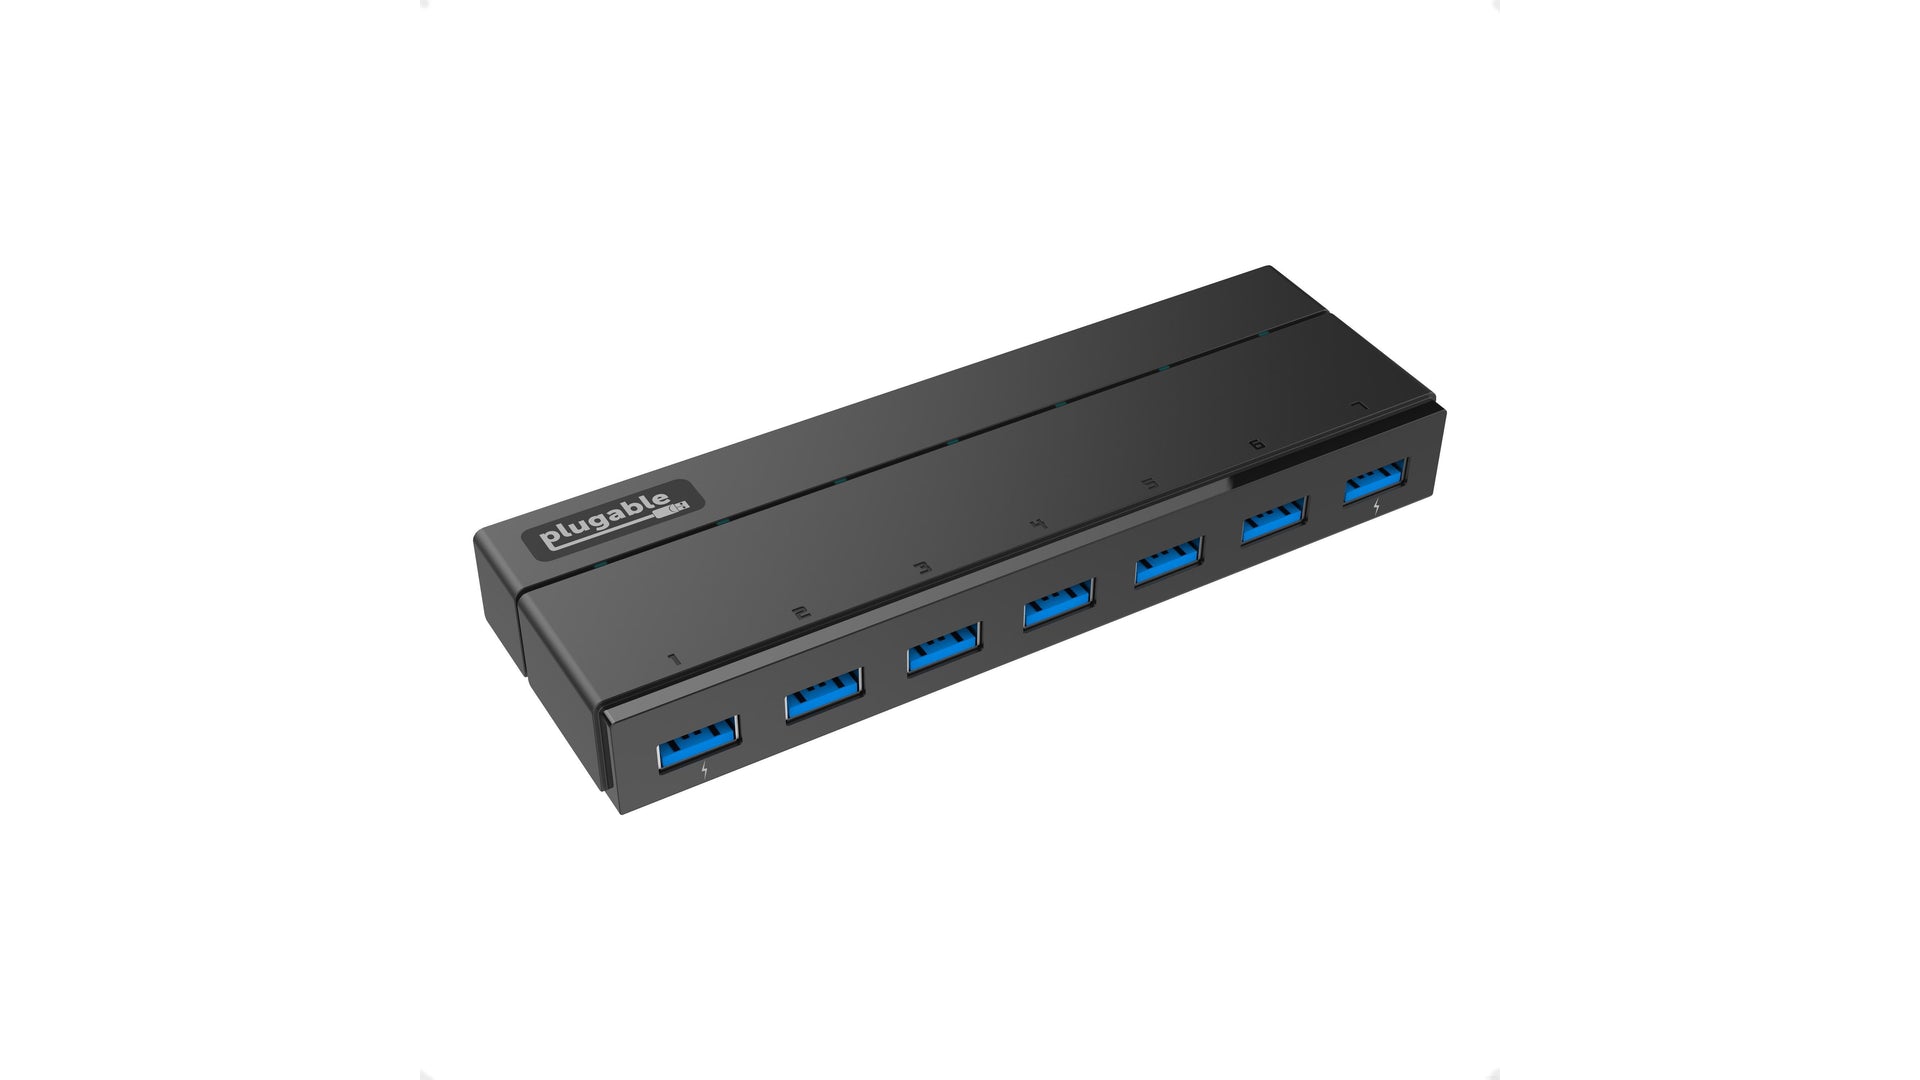 USB 3.0 7-Port Hub with 2 BC 1.2 Charging Ports and 36W Power Adapter –  Plugable Technologies